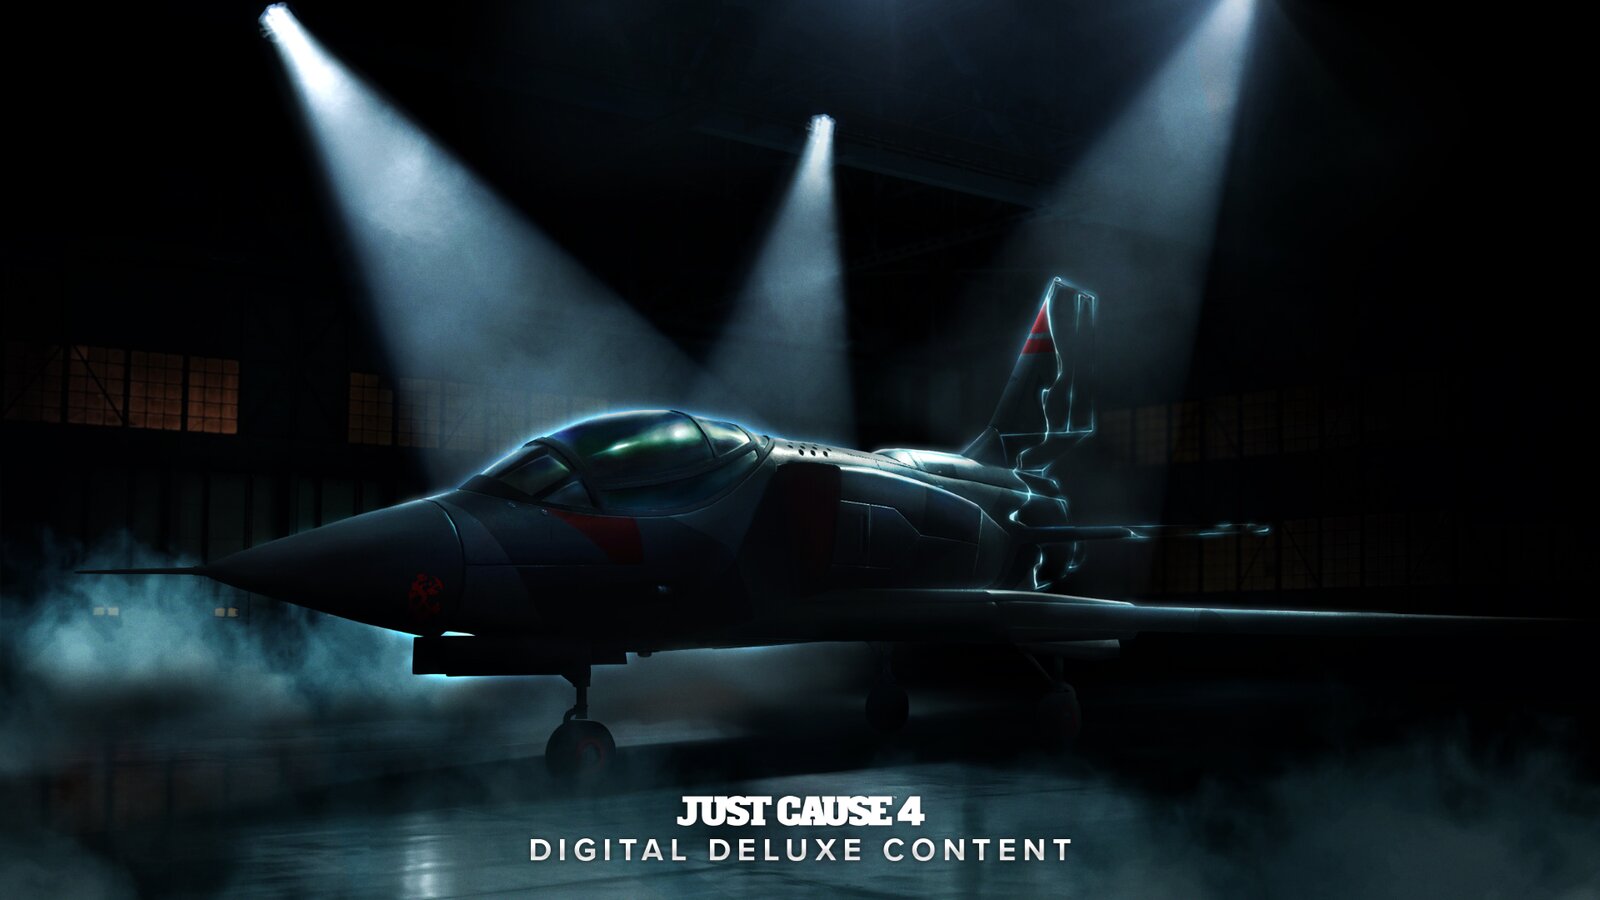 Just Cause 4 - Digital Deluxe Content